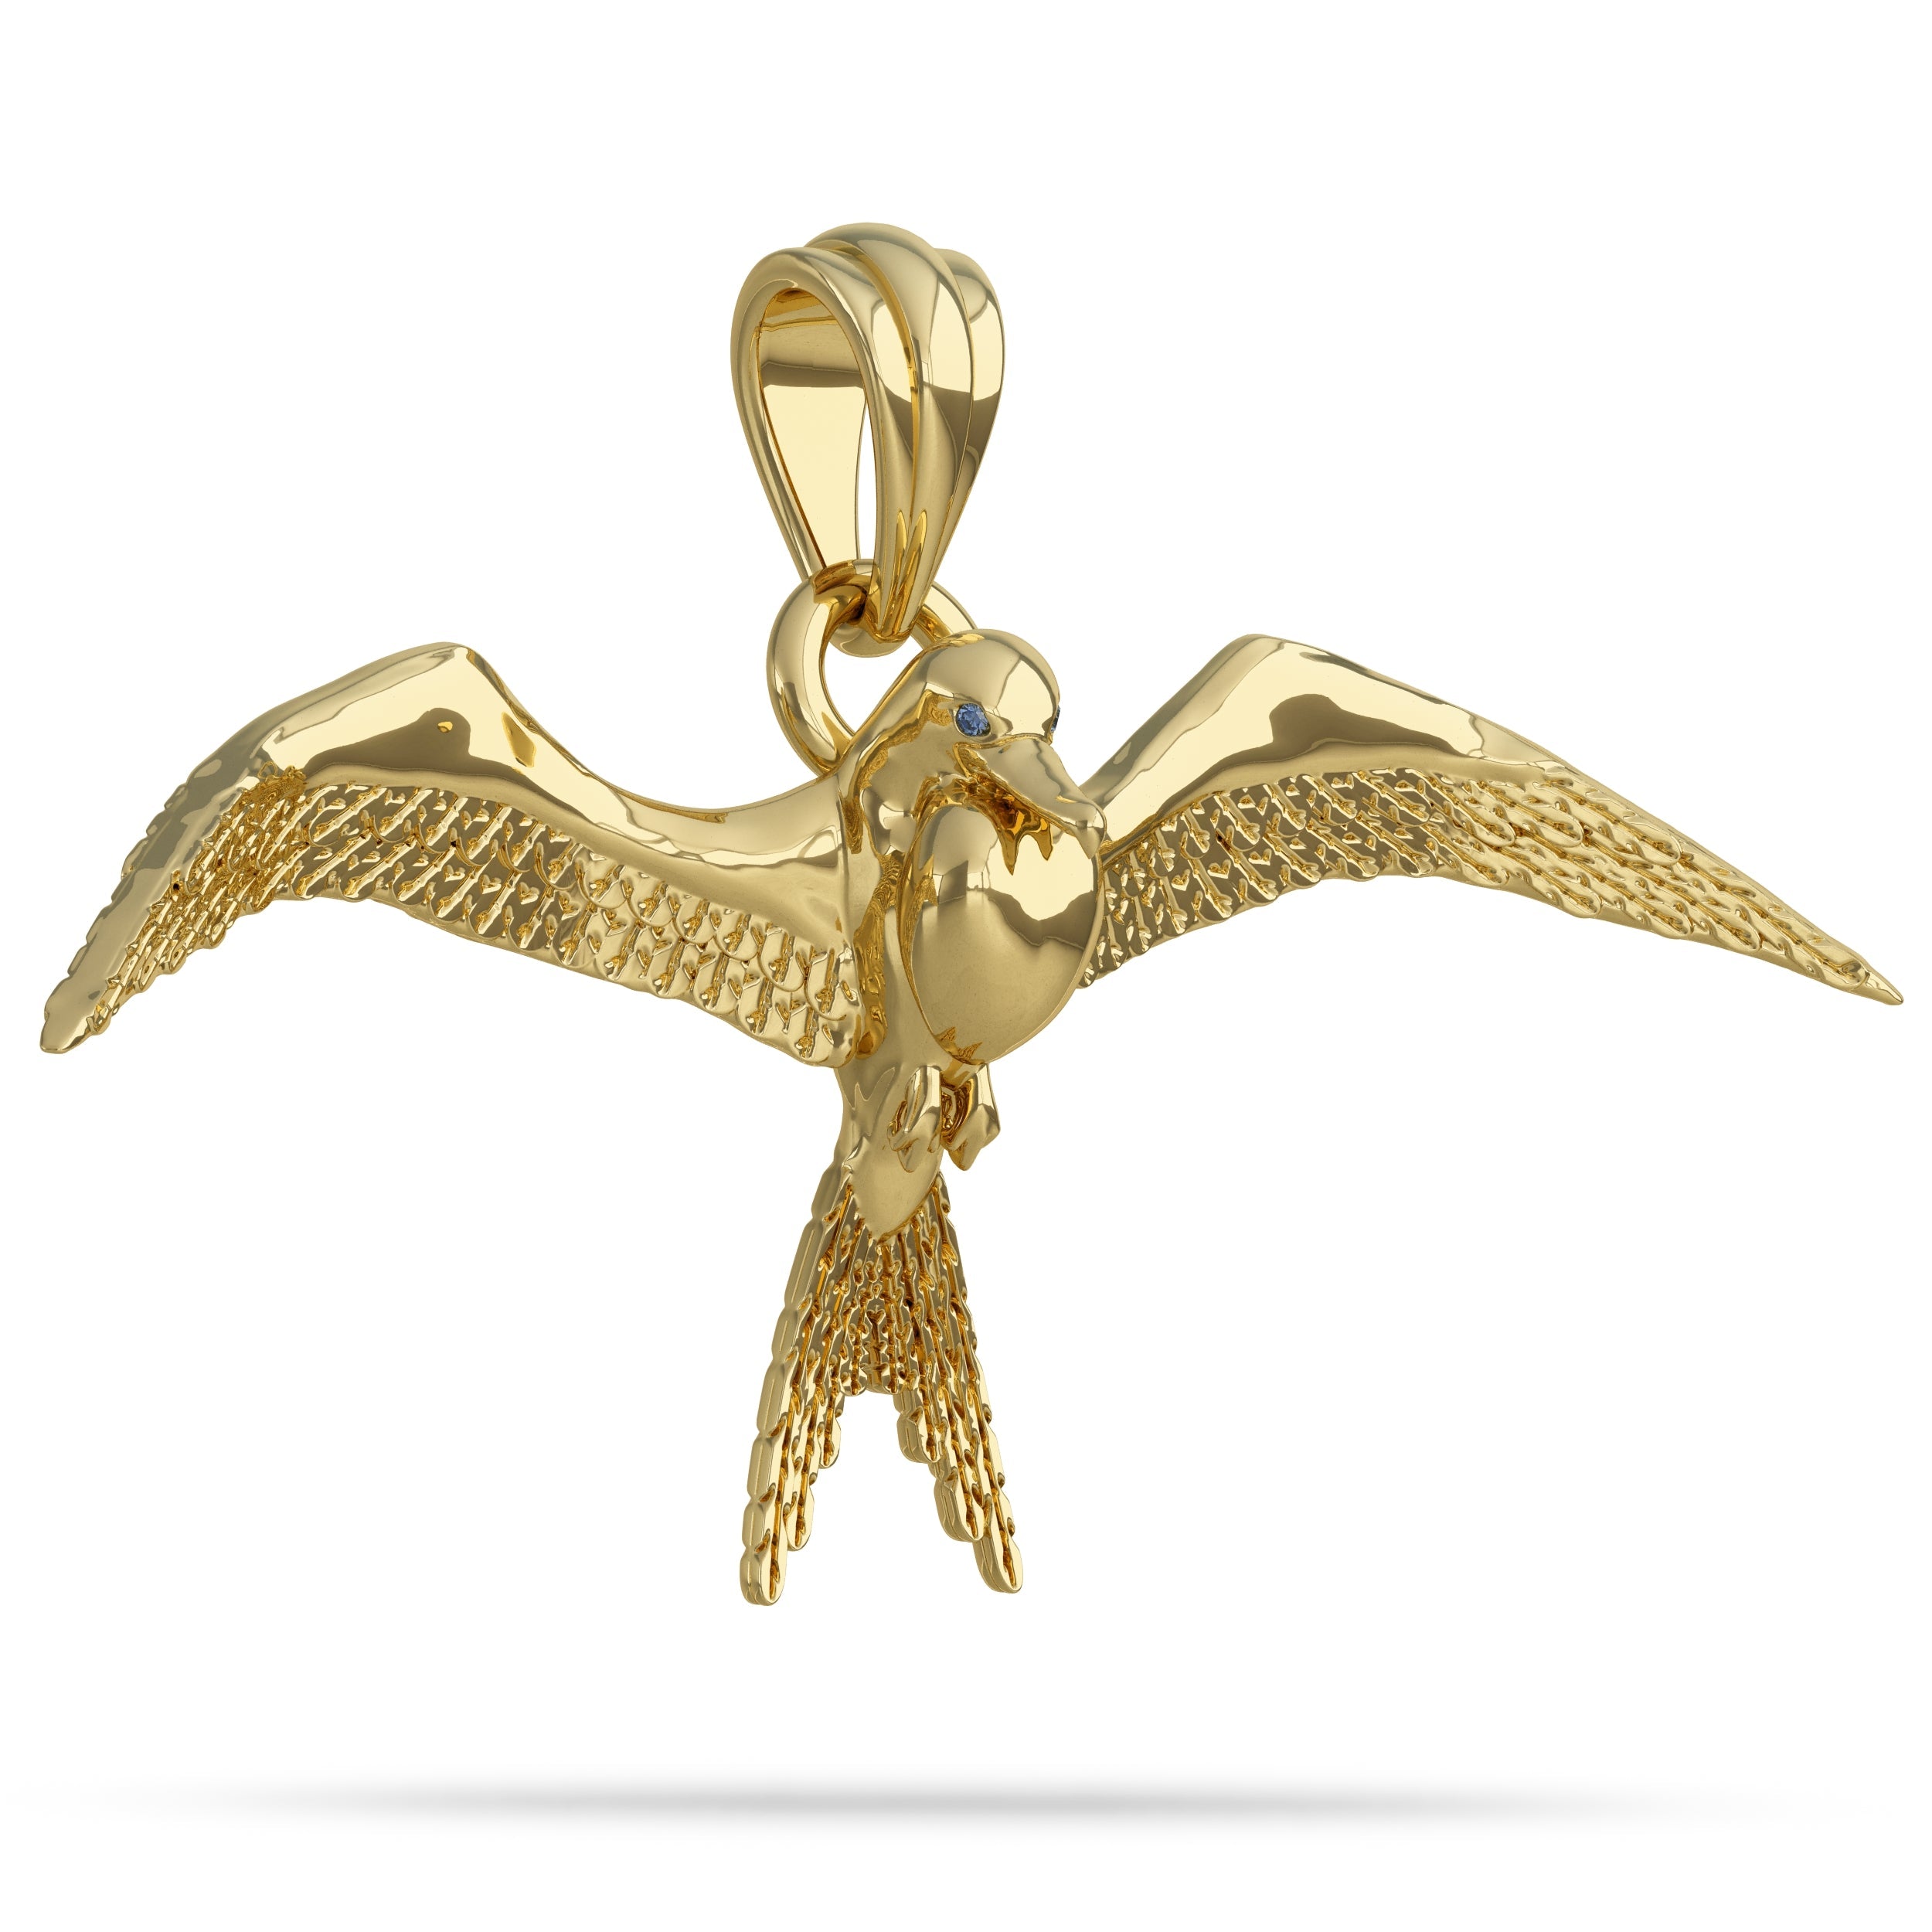 Solid 14k Gold Magnificent Frigate War Bird Pendant “On the Prowl” By Nautical Treasure Jewelry 